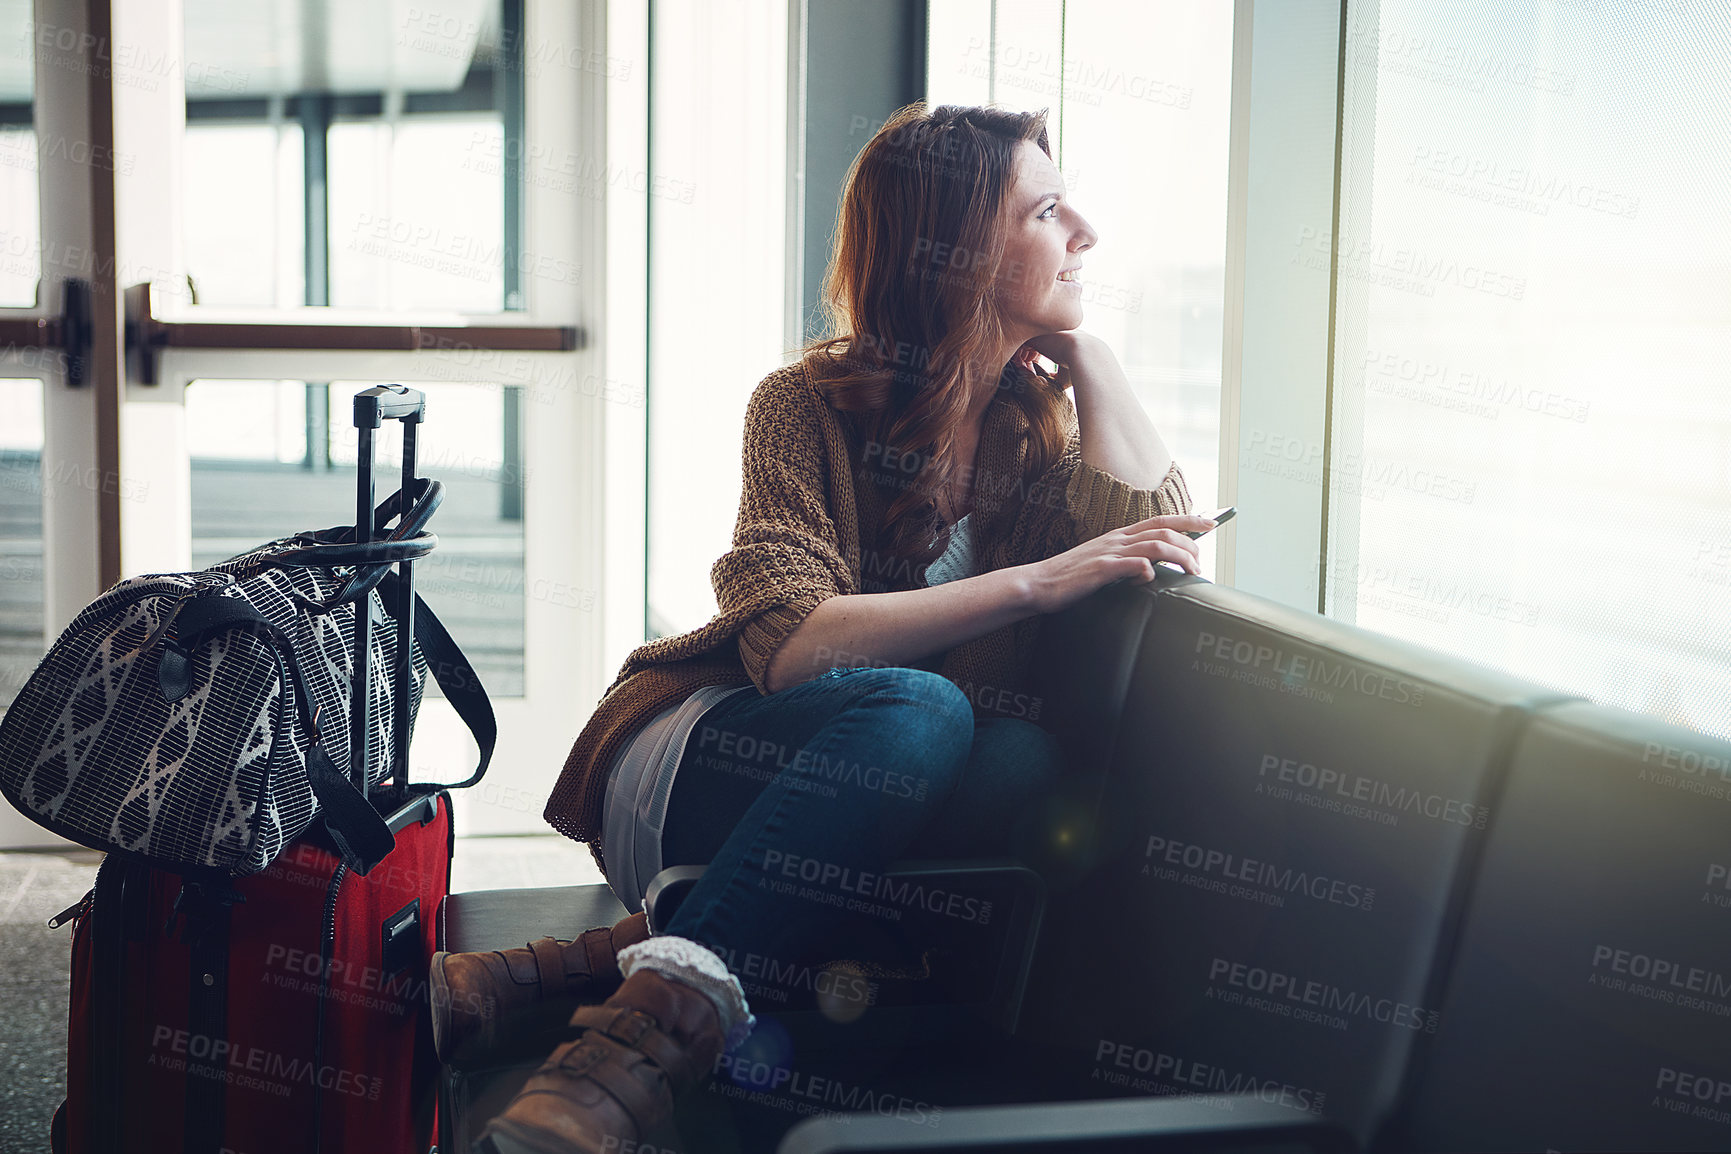 Buy stock photo Shot of a young woman sitting inside of an airport with her luggage and holding her cellphone while looking outside